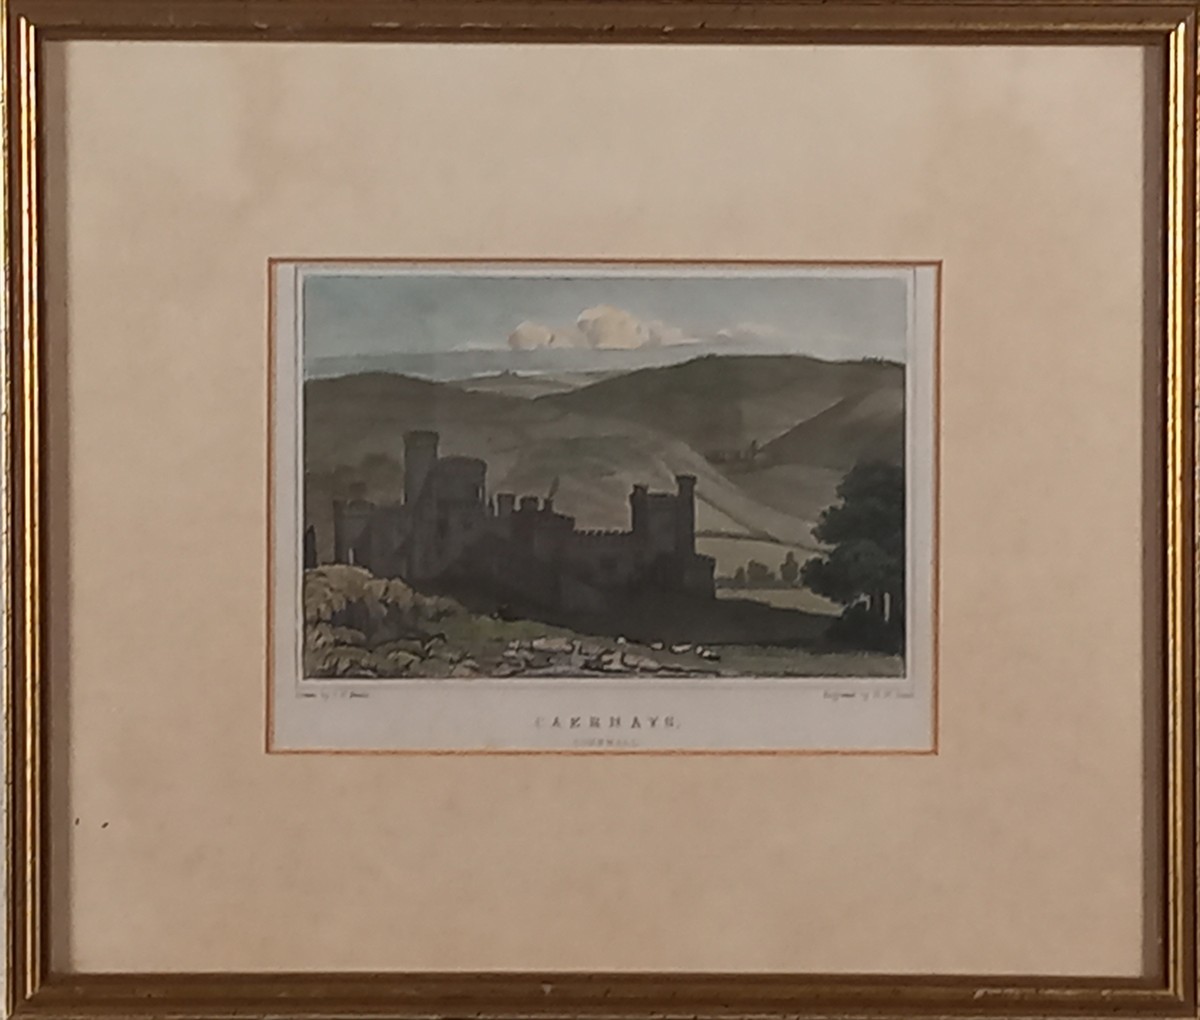 John Preston NEALE (British 1780-1847) Caerhays Cornwall, Hand coloured engraving (engraved by H W - Image 2 of 3